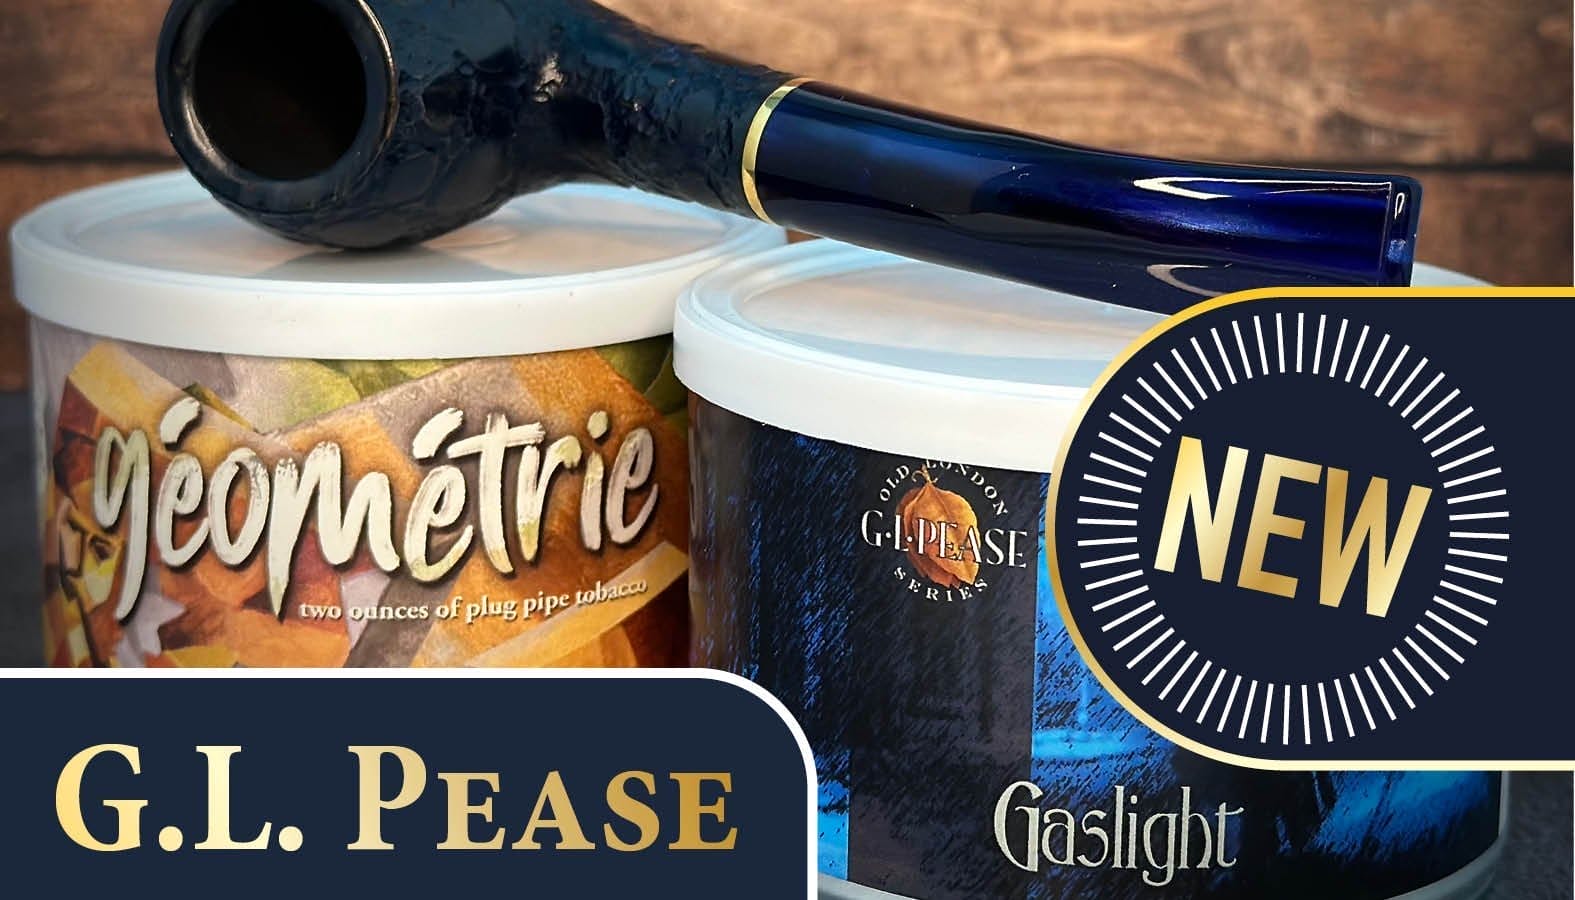 New from G.L. Pease Pipe Tobacco